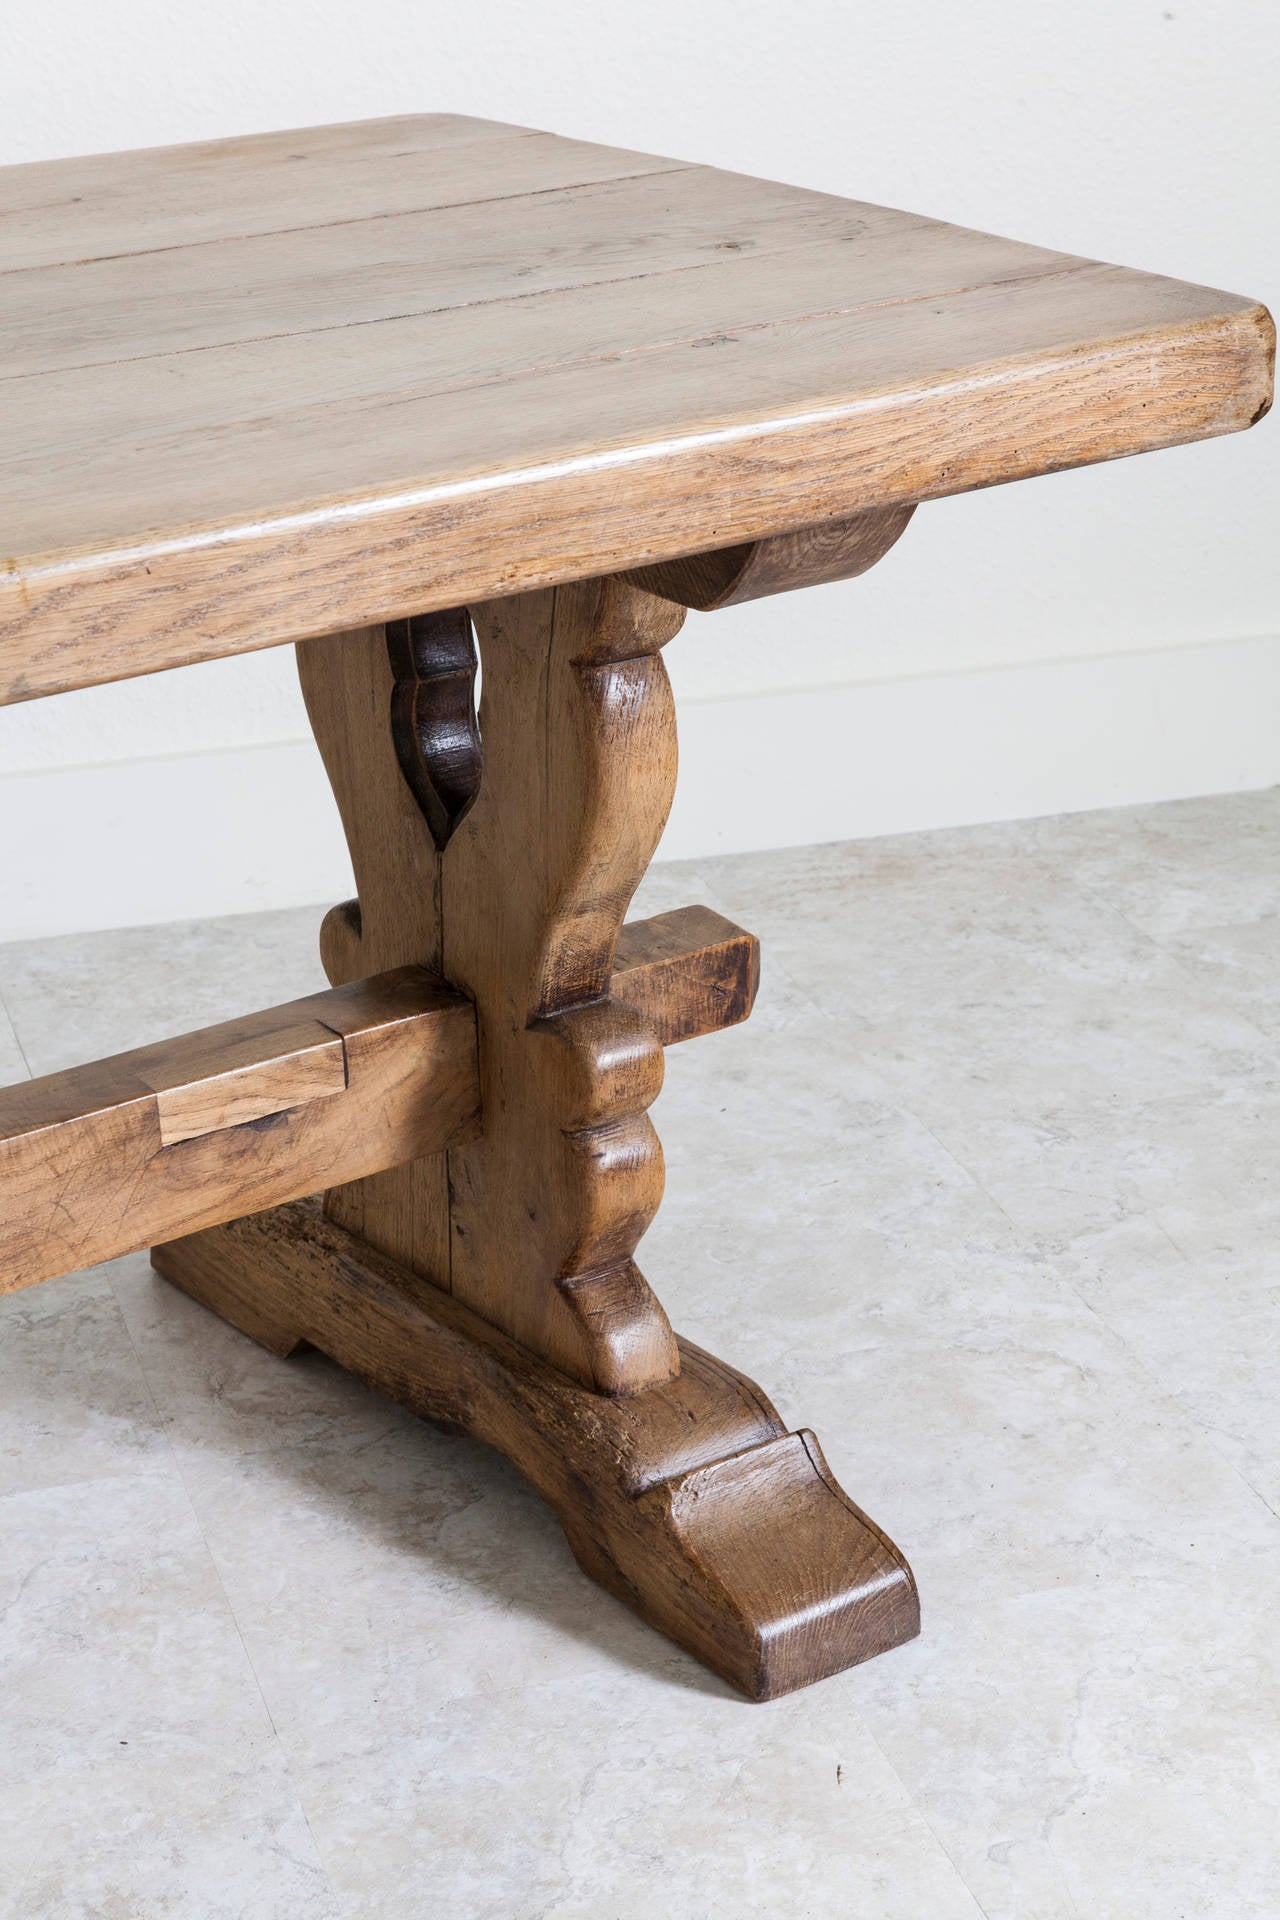 Created by artisans in Normandy, this solid French oak table has an aged light oak, almost cerused patina and handsome lines. With hand-cut 3